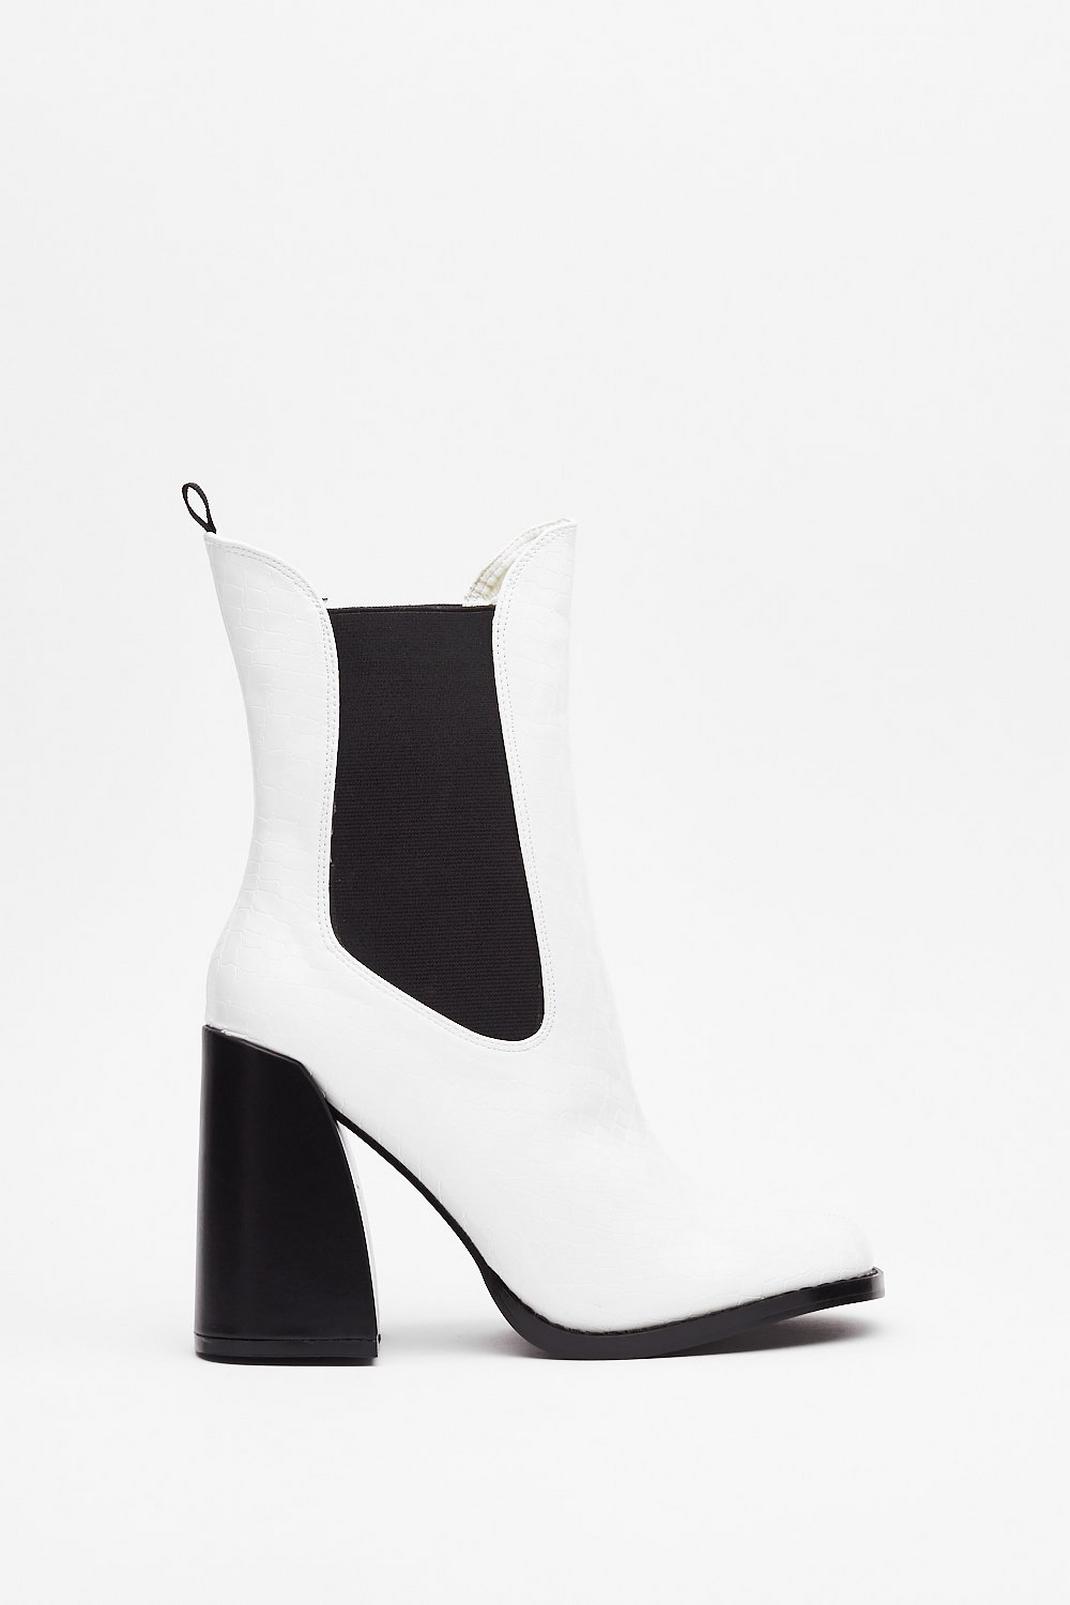 Croc Happening Faux Leather Heeled Boots | Nasty Gal